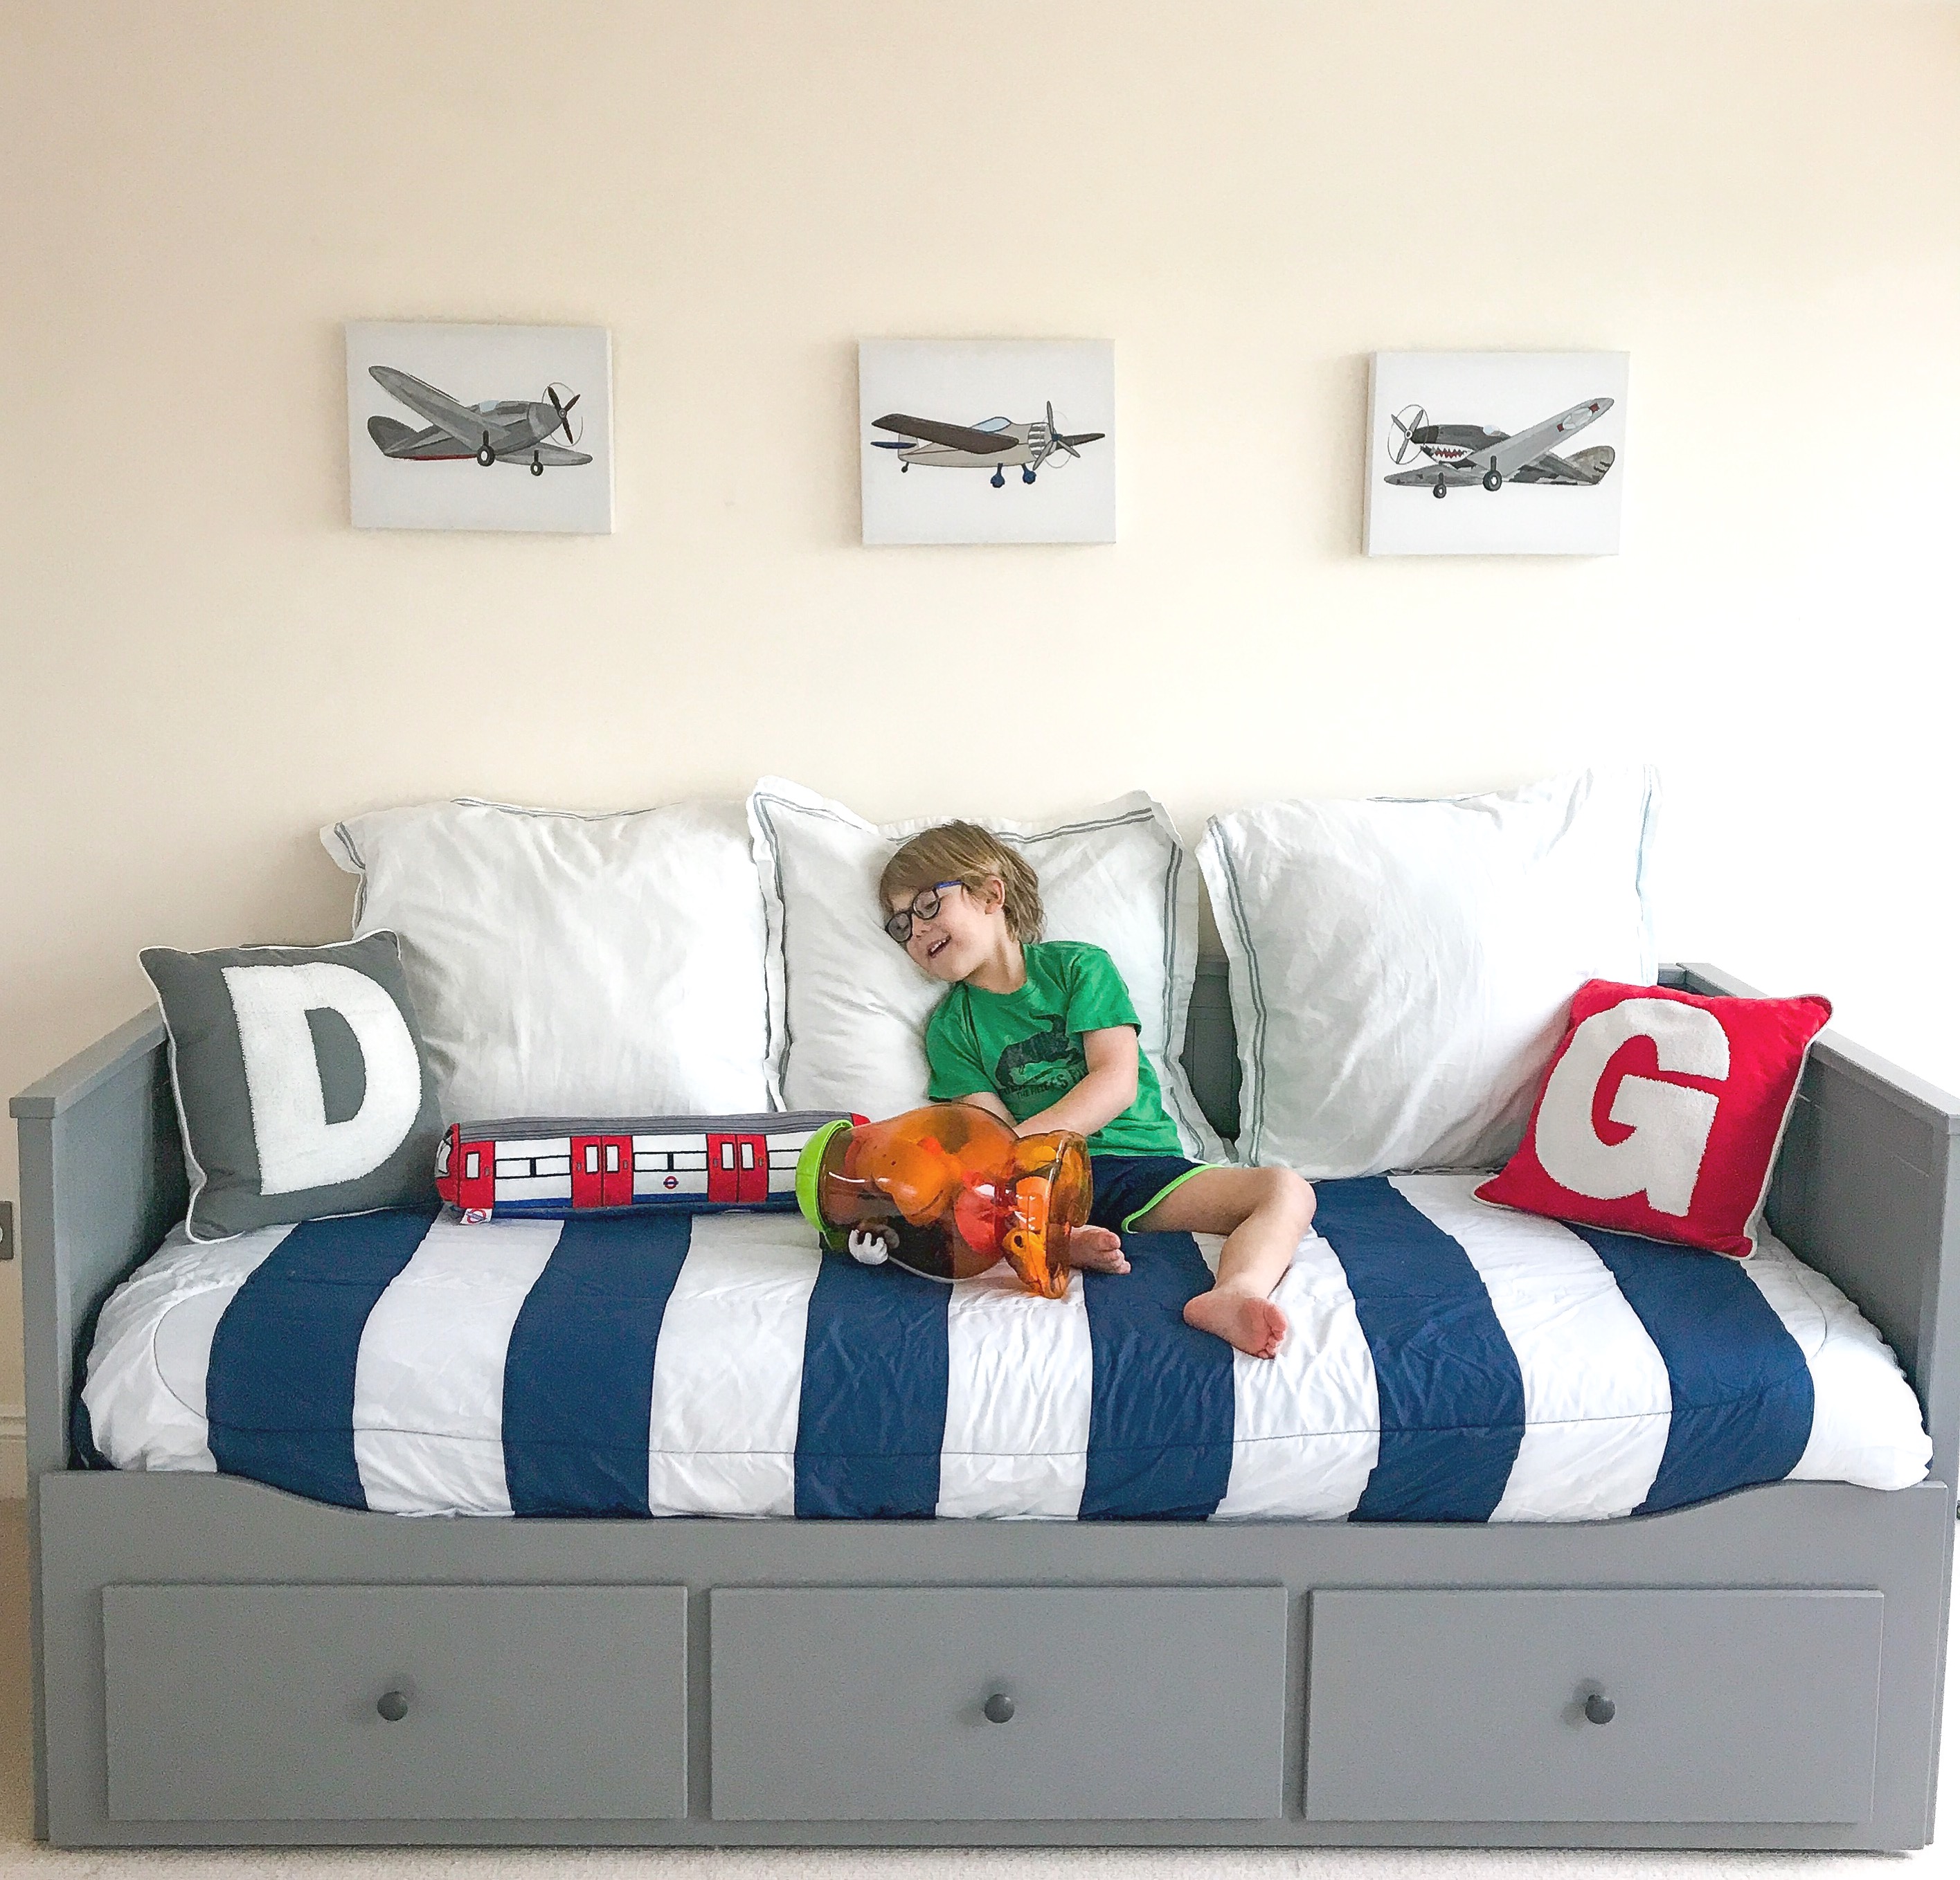 daybed boys room